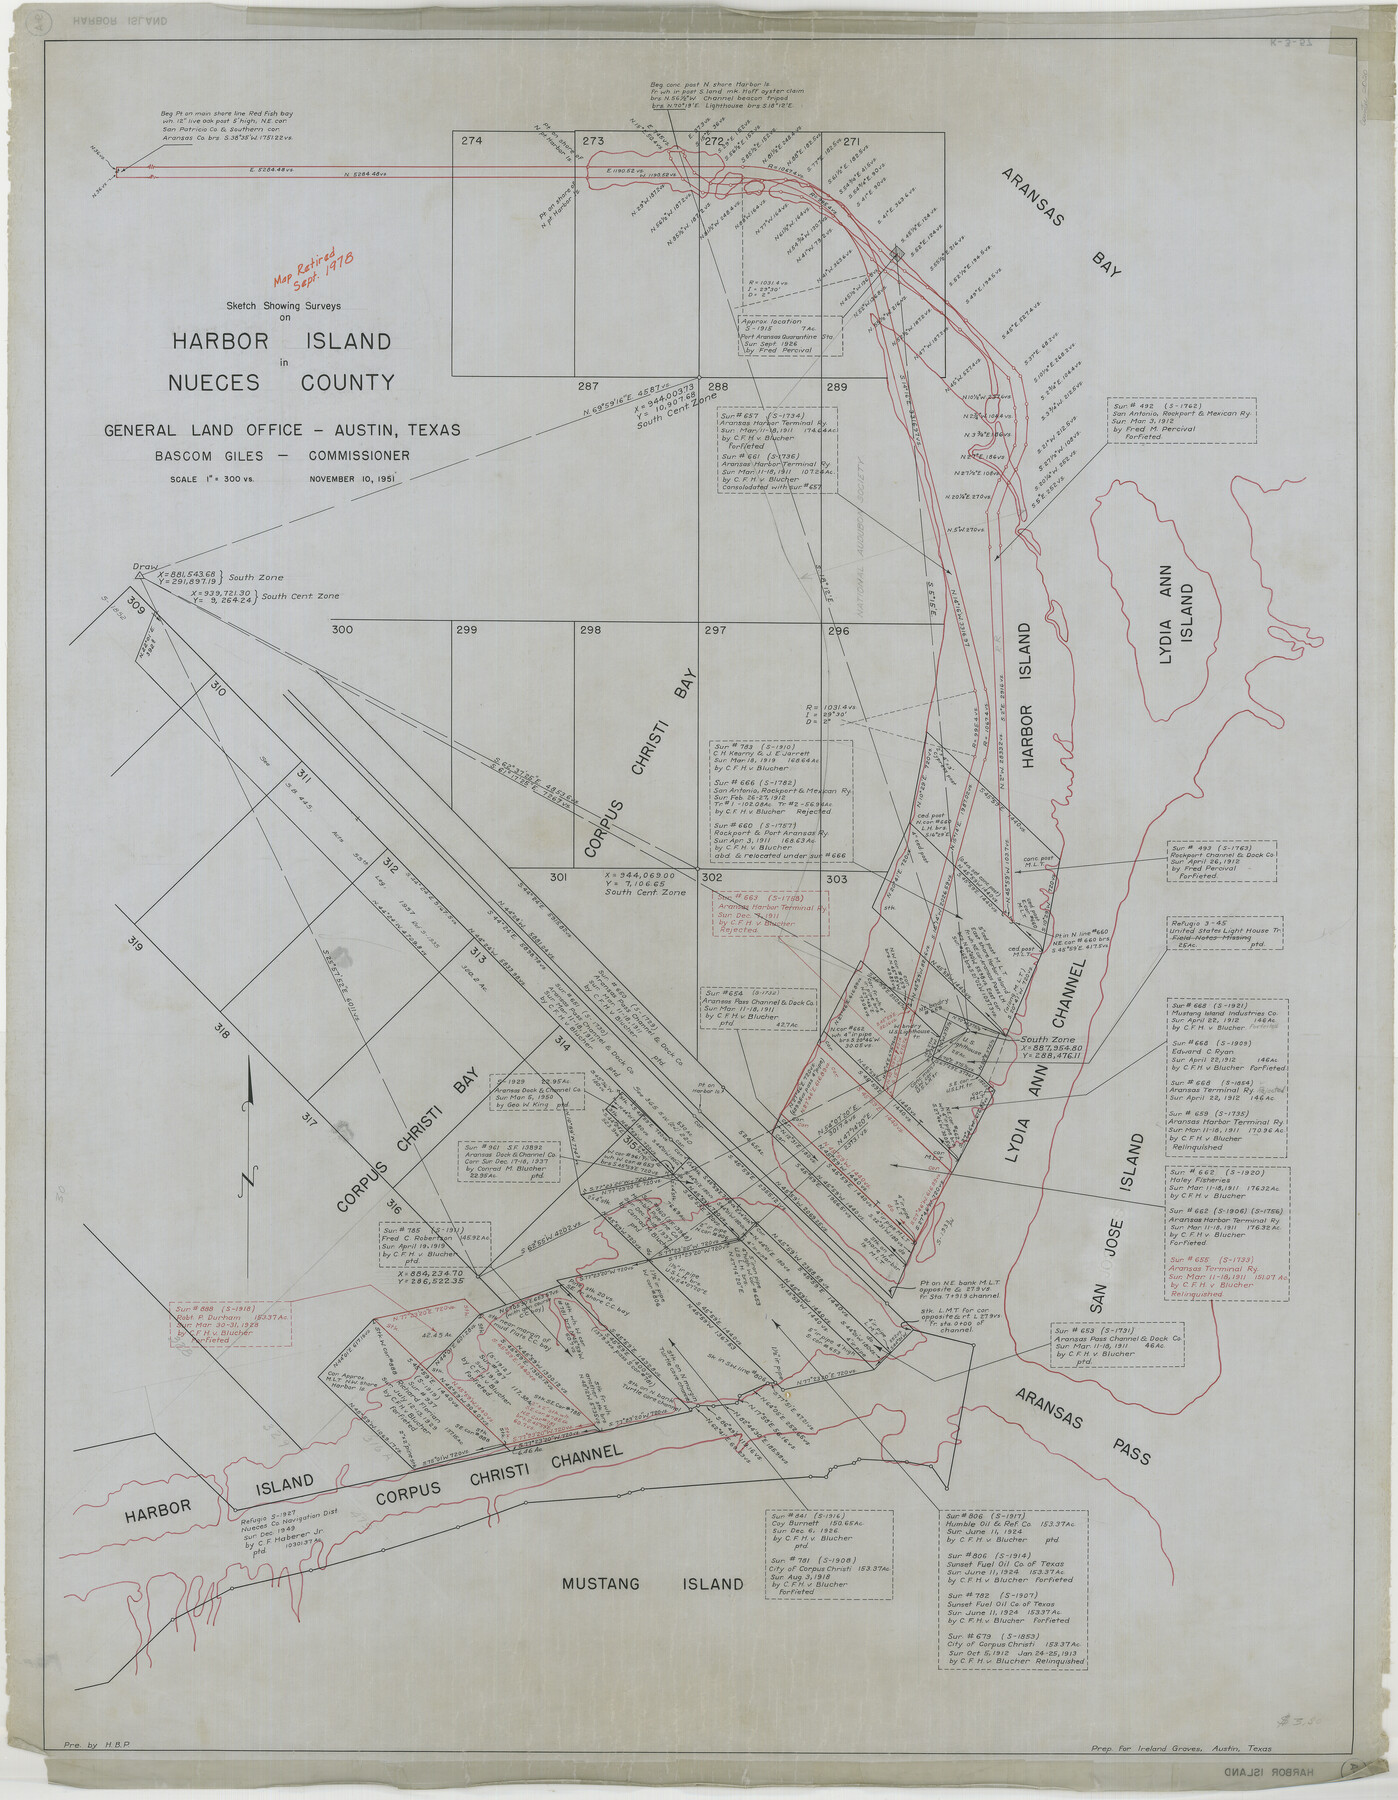 2020, Sketch showing surveys on Harbor Island in Nueces County, General Map Collection